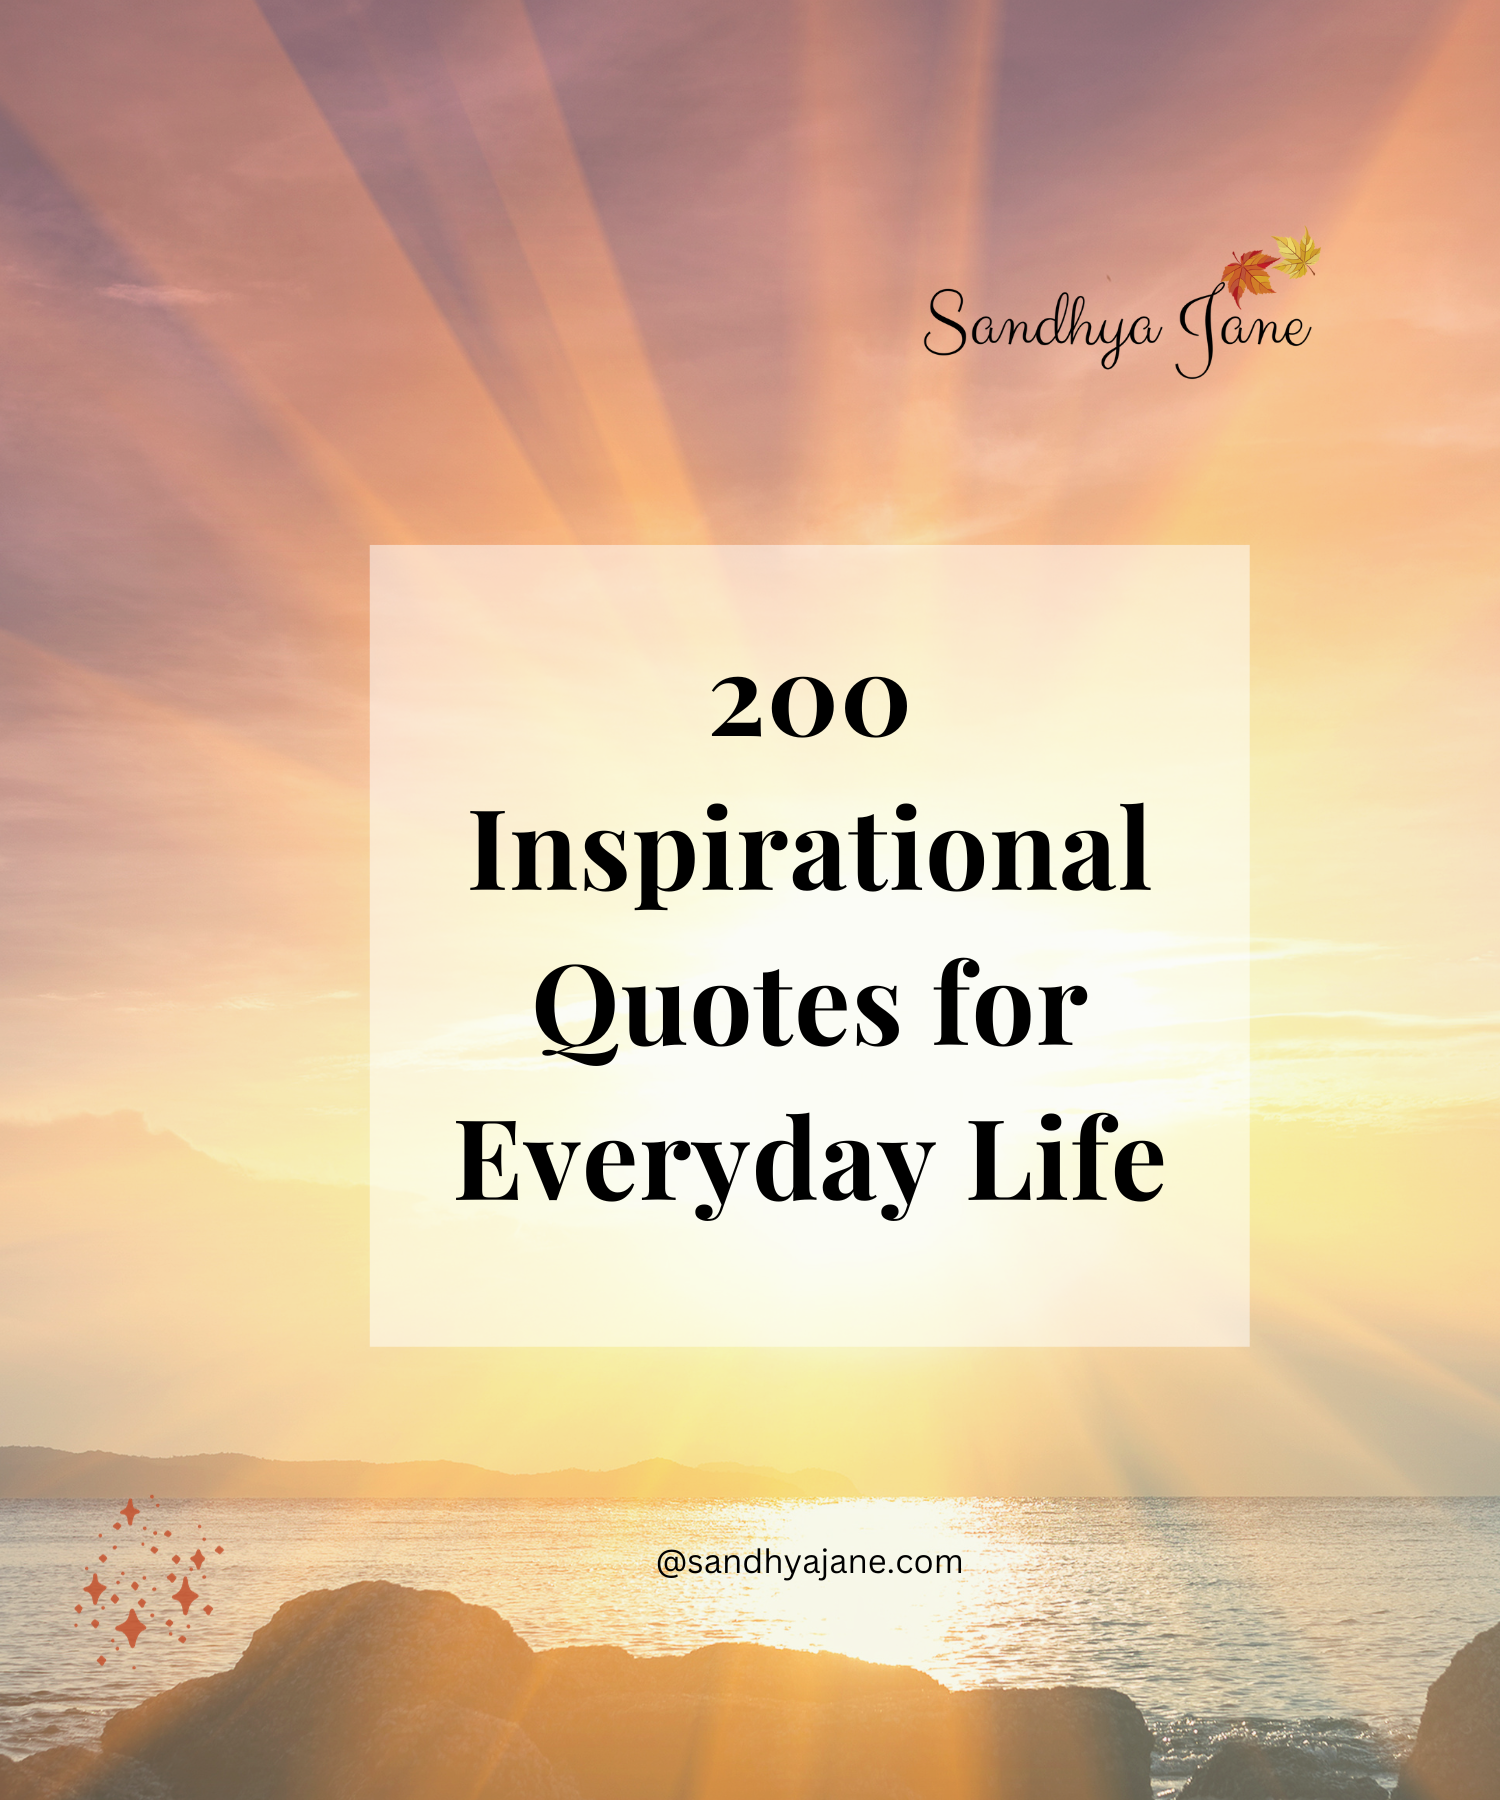 200 inspirational quote for everyday life book cover